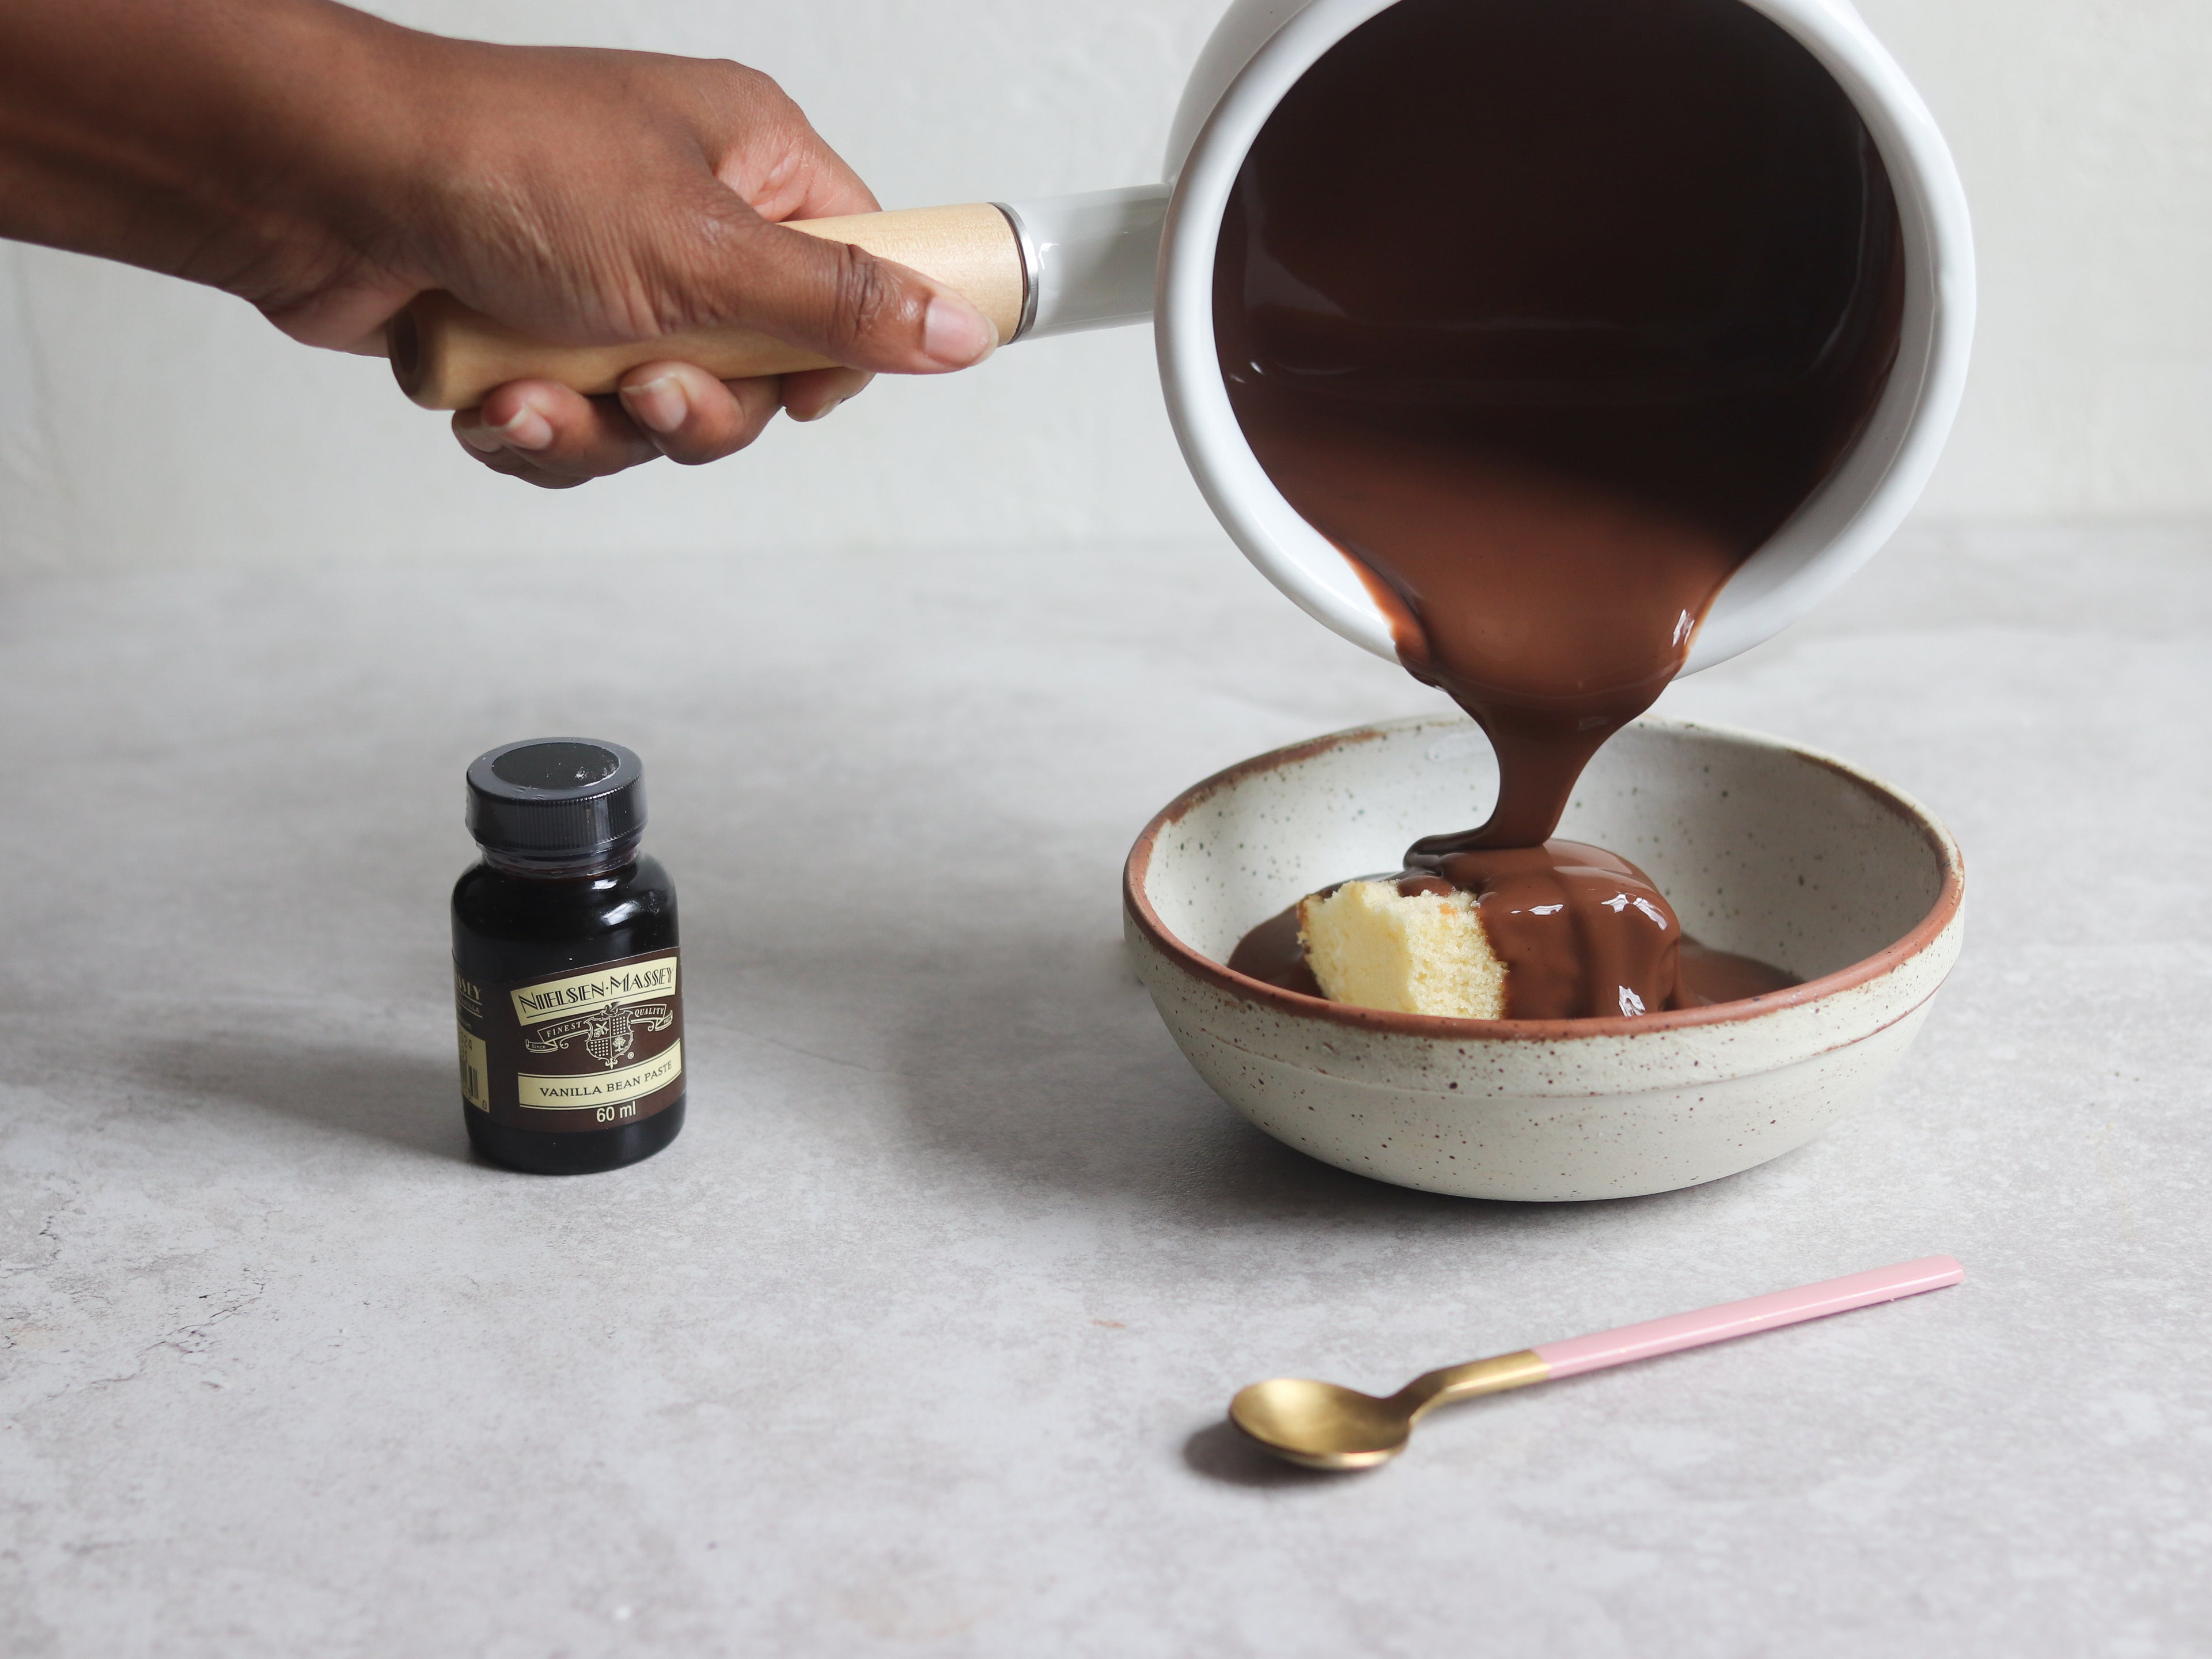 Chocolate Custard being poured over a sponge cake from a saucepan with a hand. Next to a bottle of Neilsen-Massey Vanilla Extract